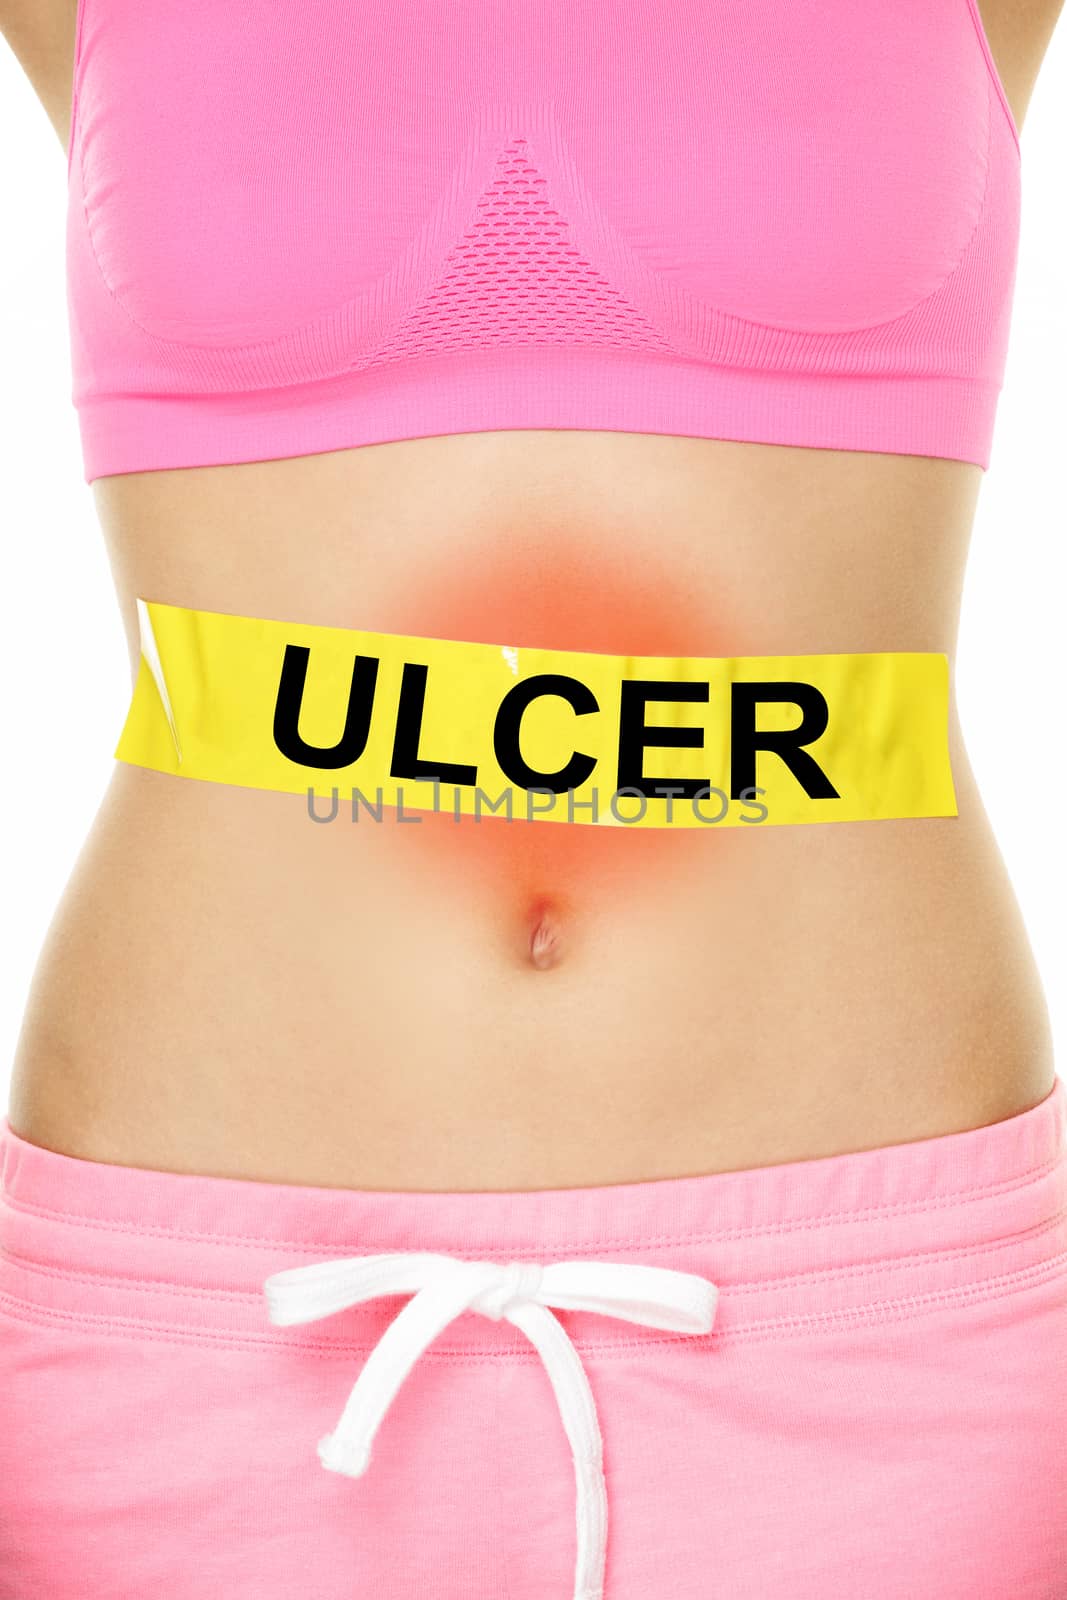 Ulcer. Conceptual Bare Woman Stomach with Yellow Tape, Emphasizing Ulcer Text, on White Background.